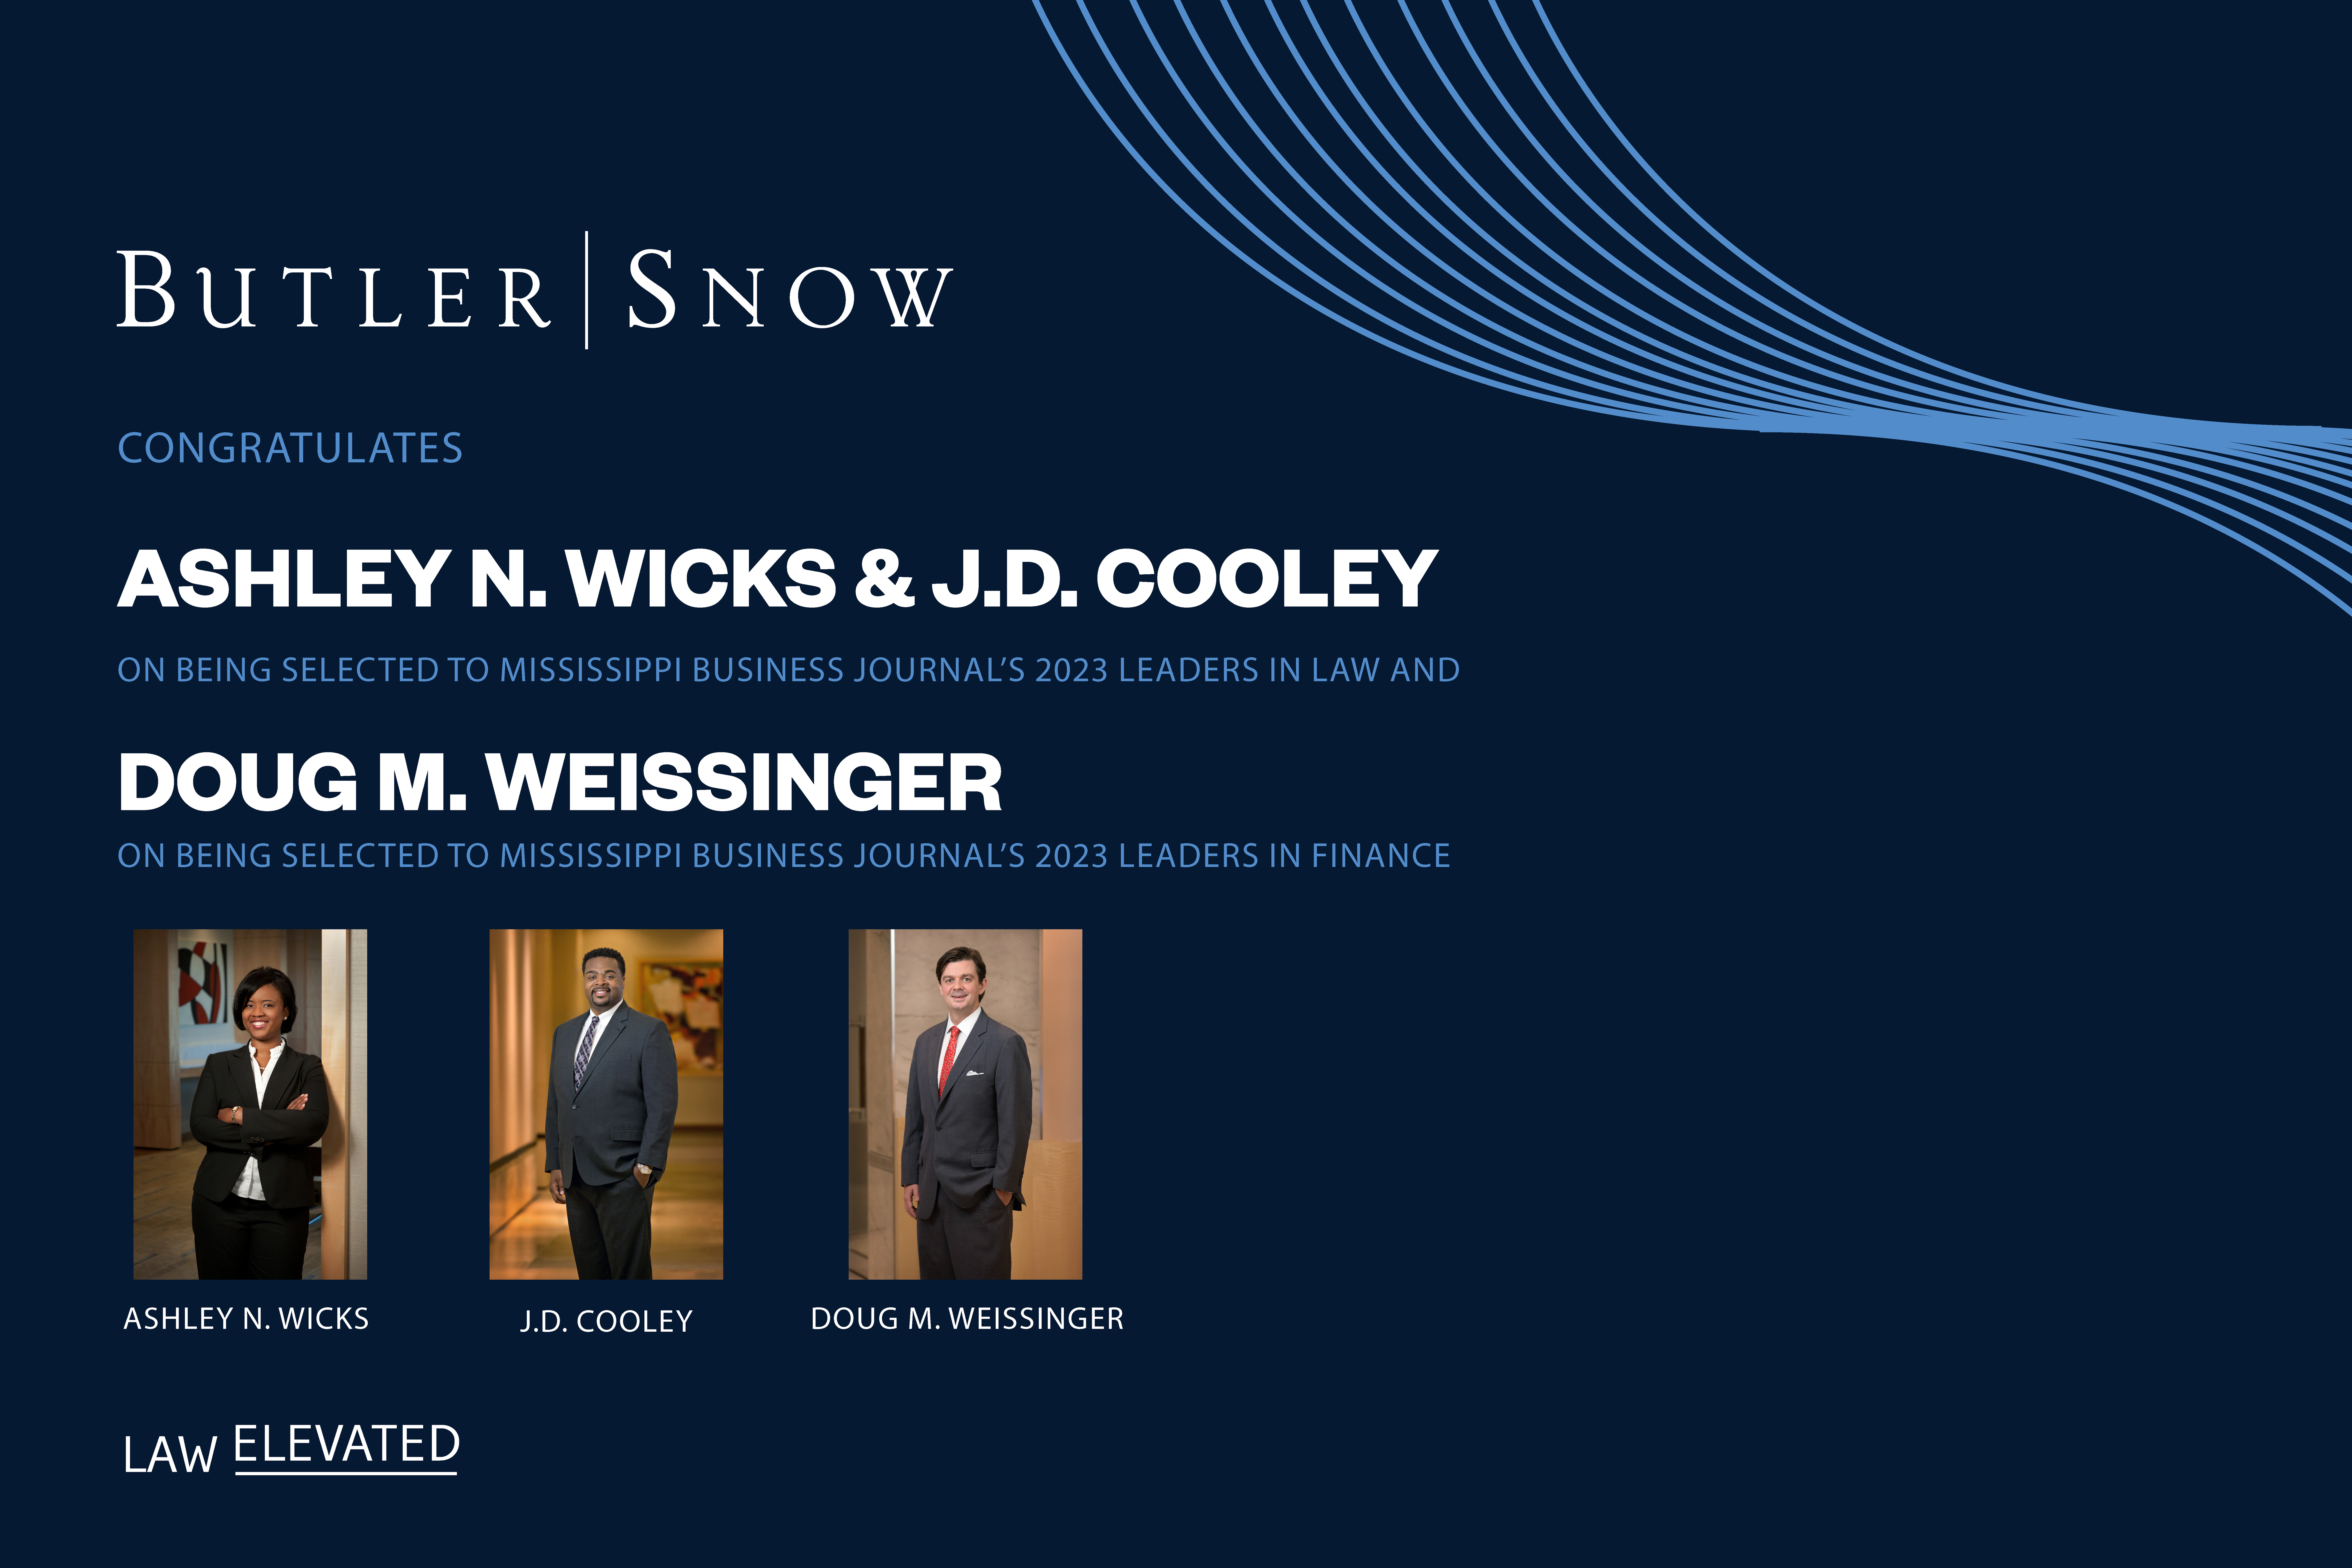 Three Butler Snow Attorneys Named 2023 Leaders in Law and Finance Awarded by Mississippi Business Journal